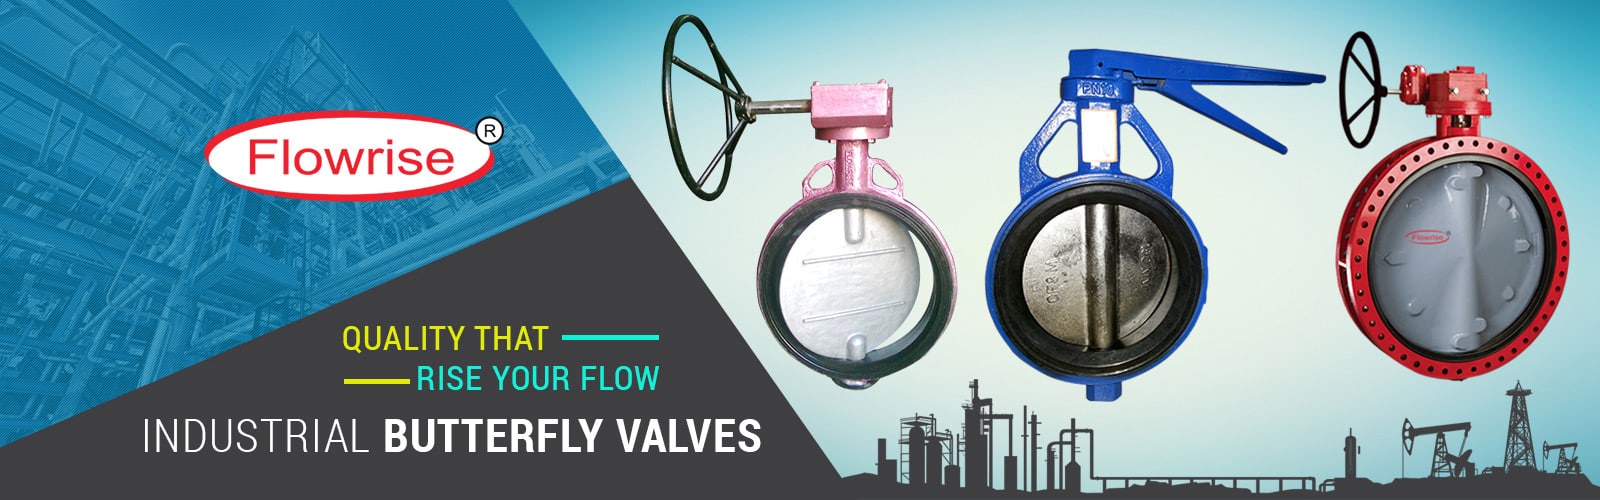 Leading Manufacturer of butterfly valves